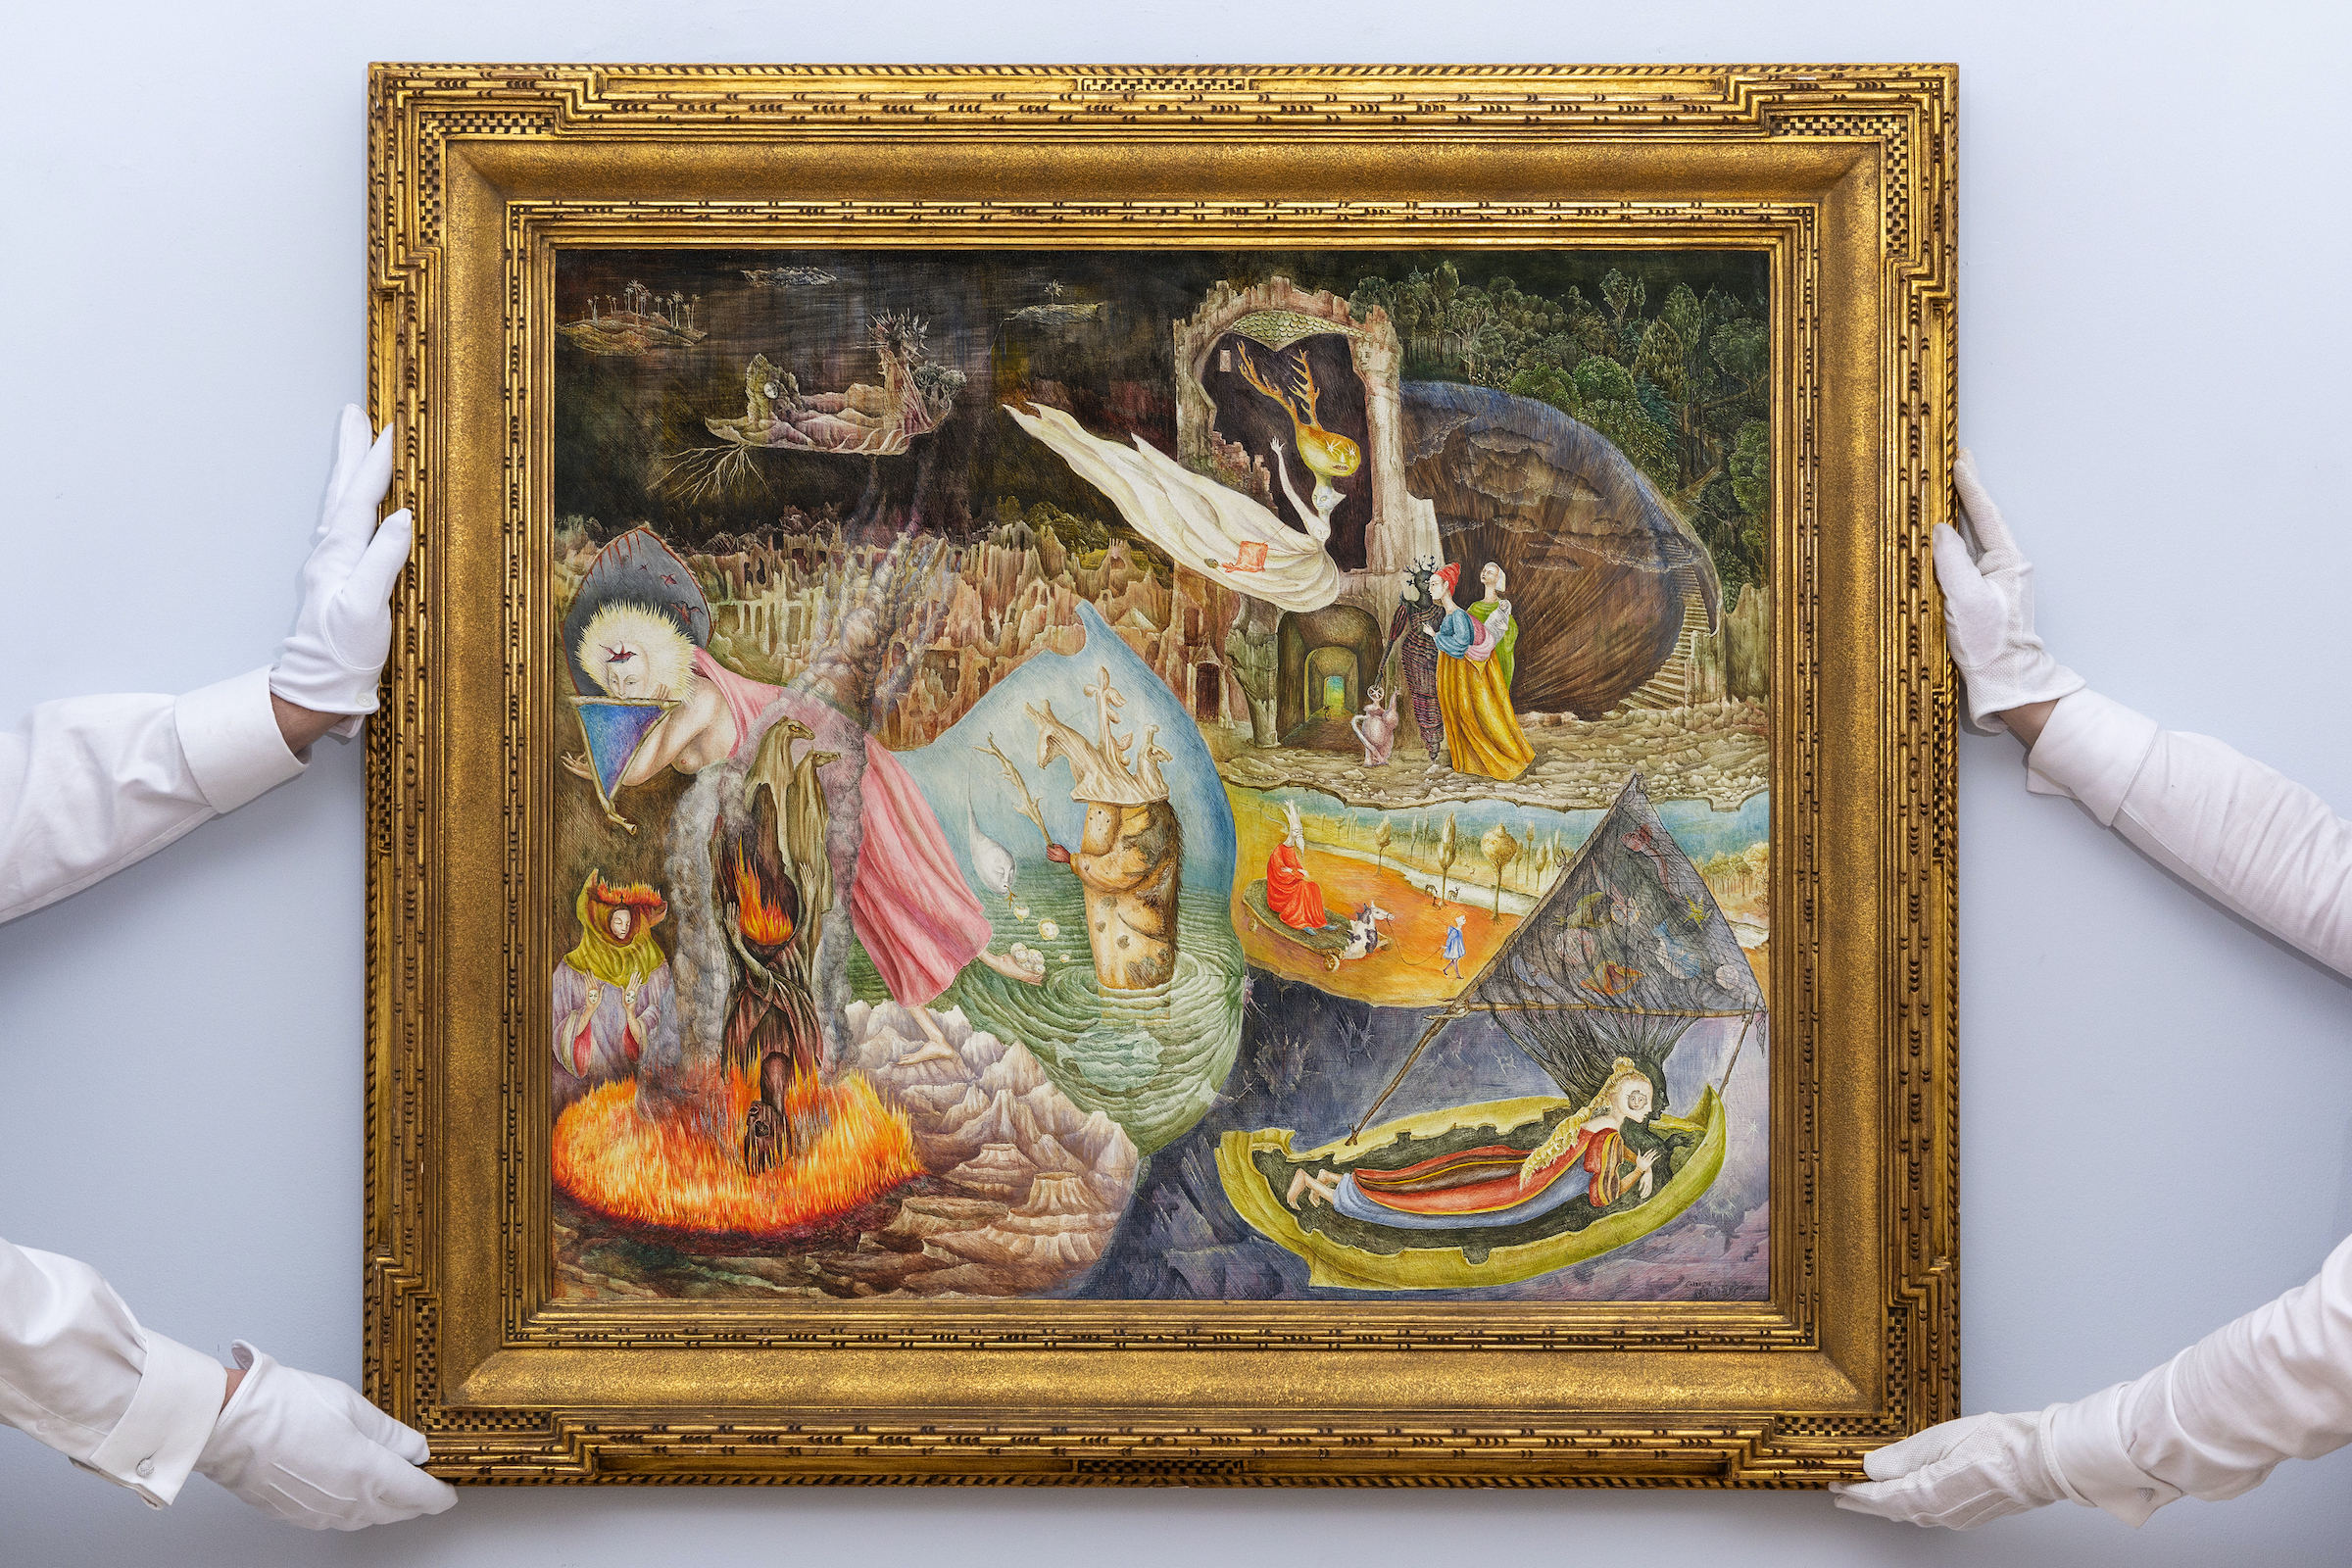 Leonora Carrington Masterpiece Could Fetch Over $12M at Auction